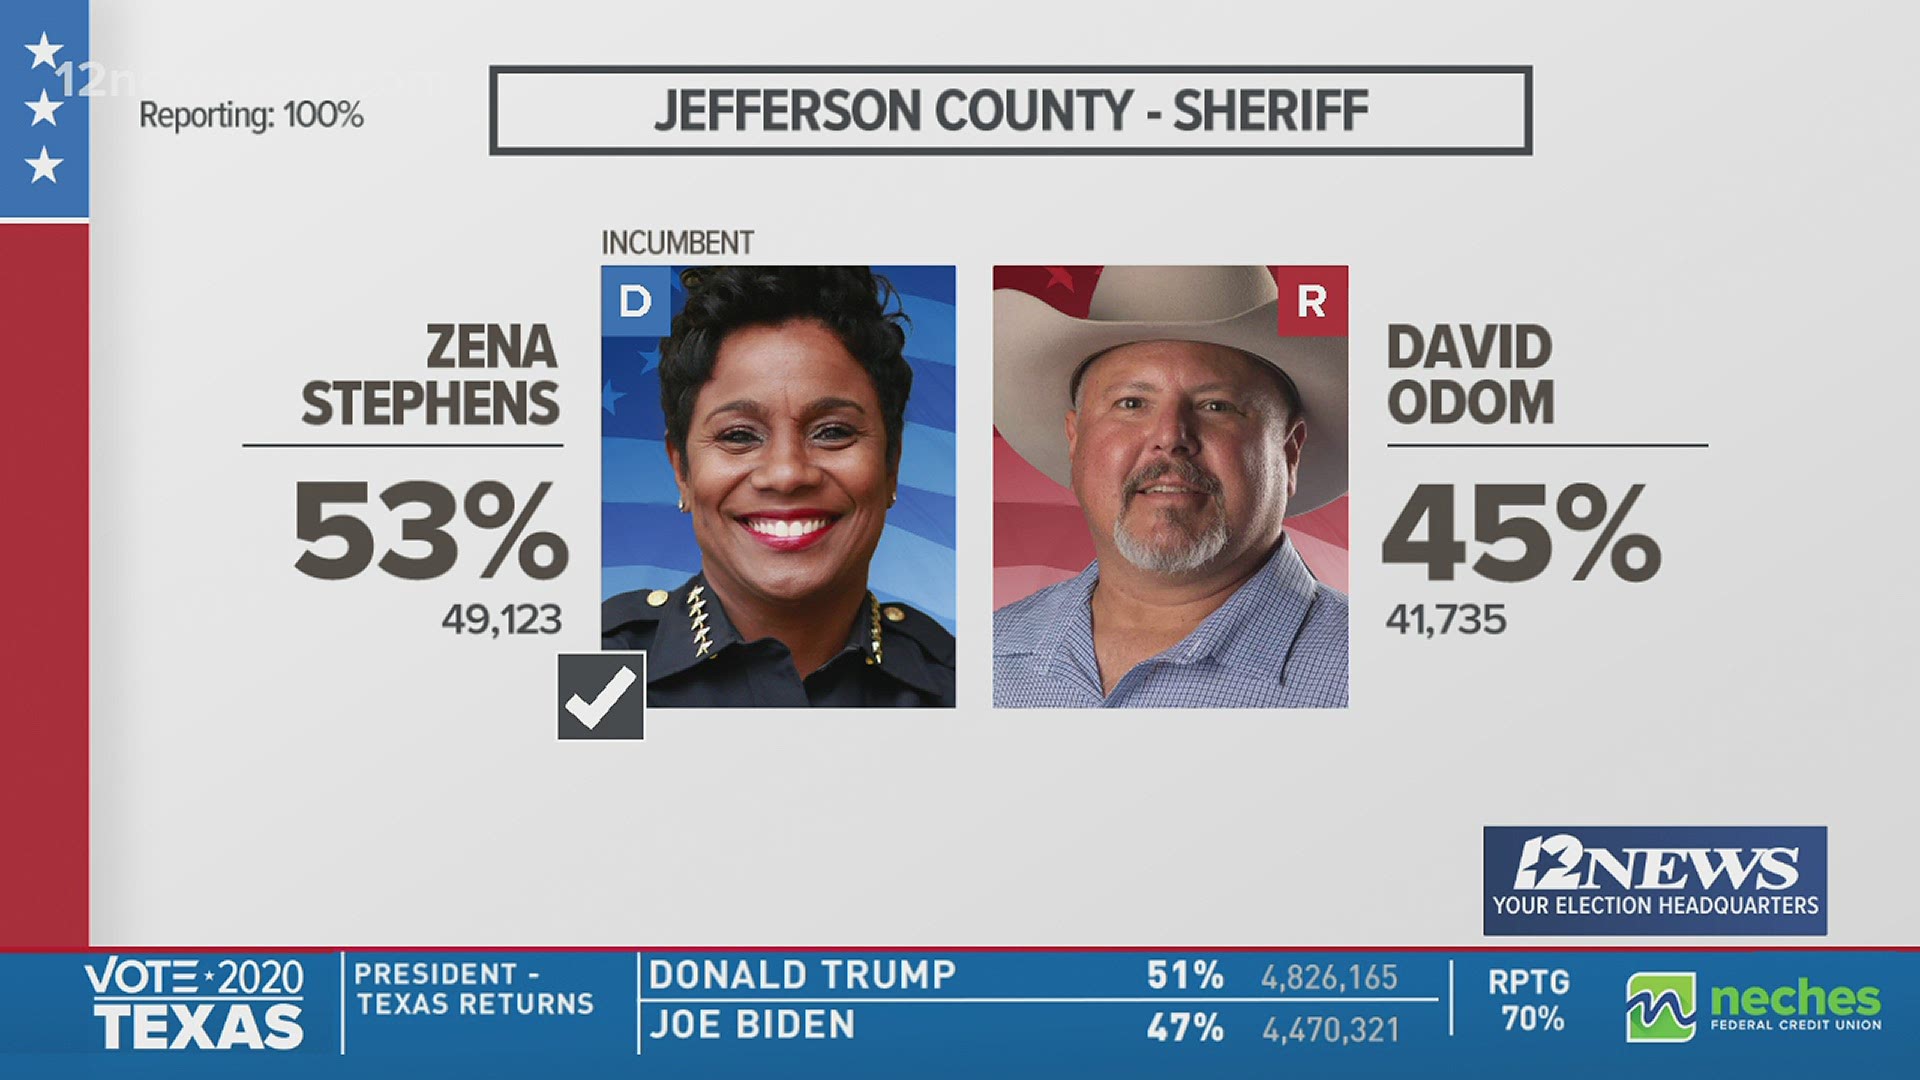 With 100 percent reporting, Jefferson County Sheriff Zena Stephens wins re-election in the 2020 race.